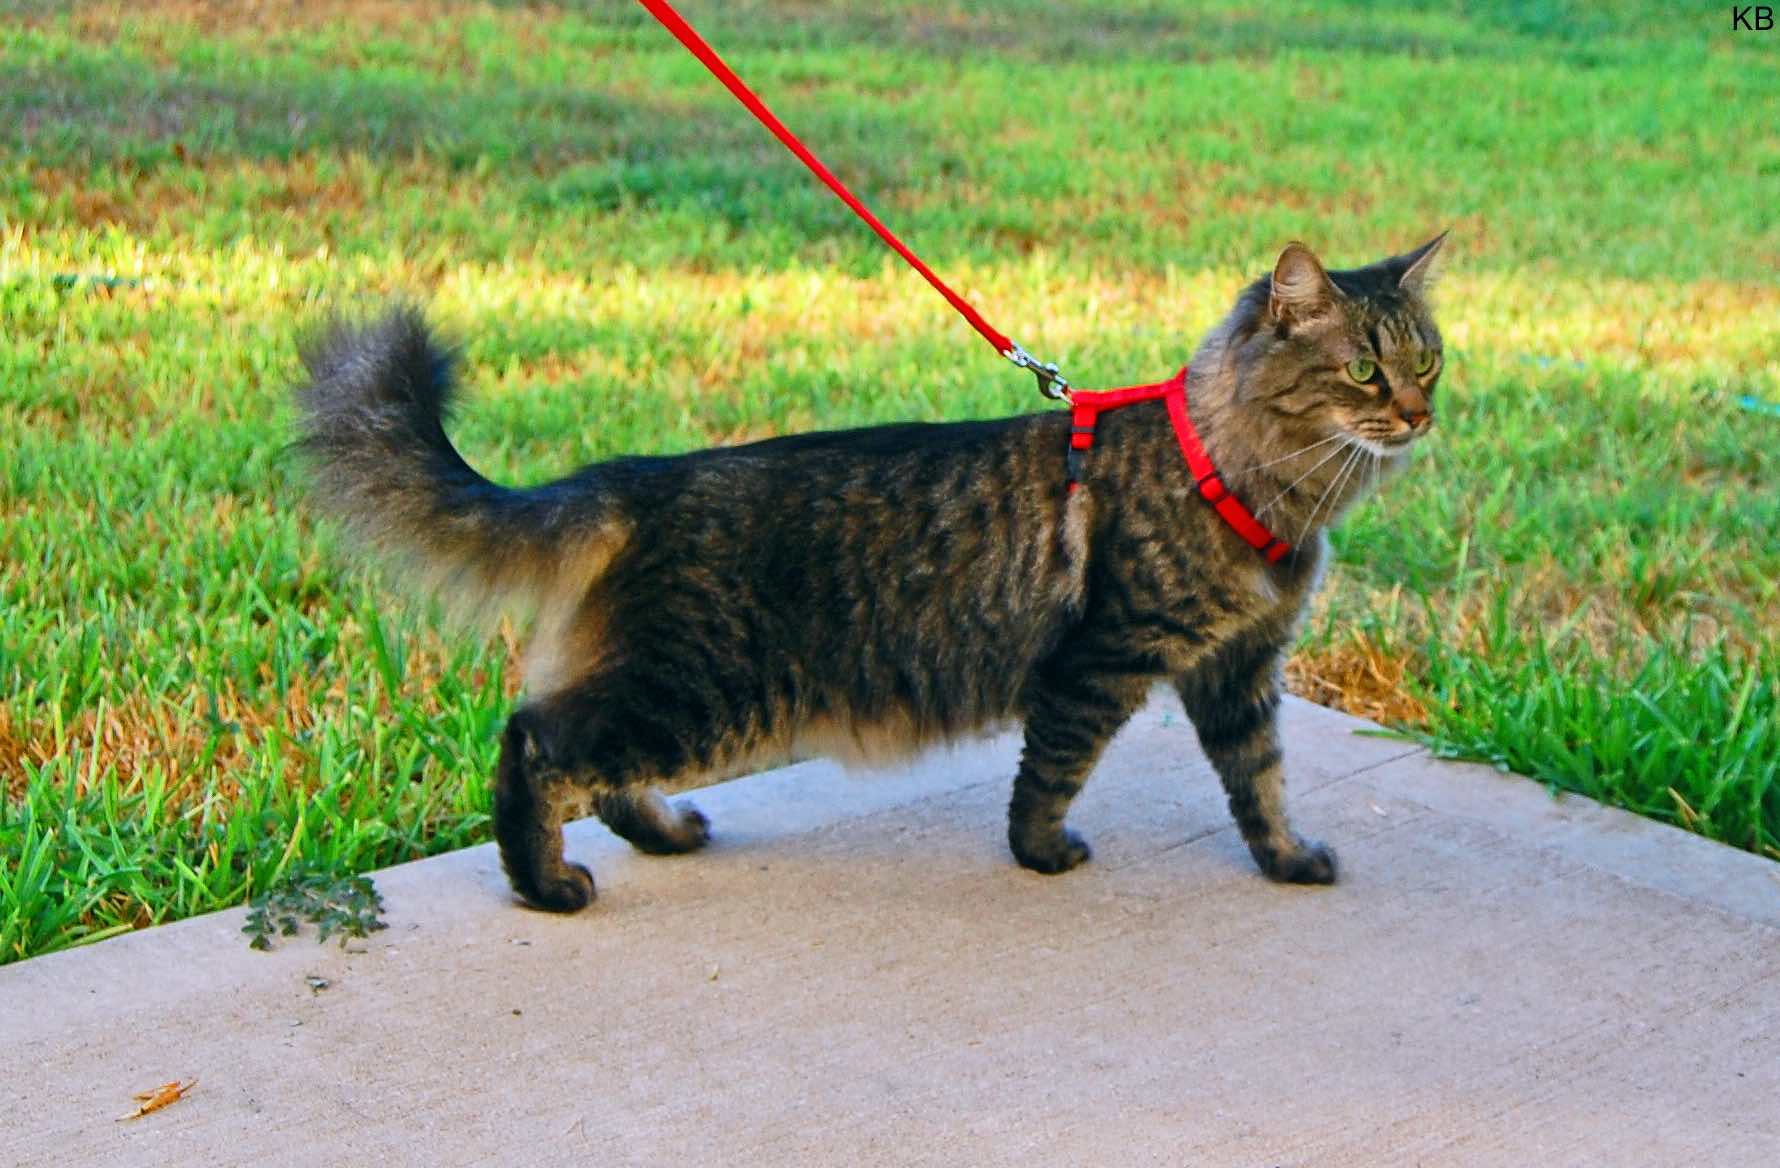 Escape Proof Adjustable for Outdoor Walking with Safety Buckle SCIROKKO Cat Harness and Leash Set 